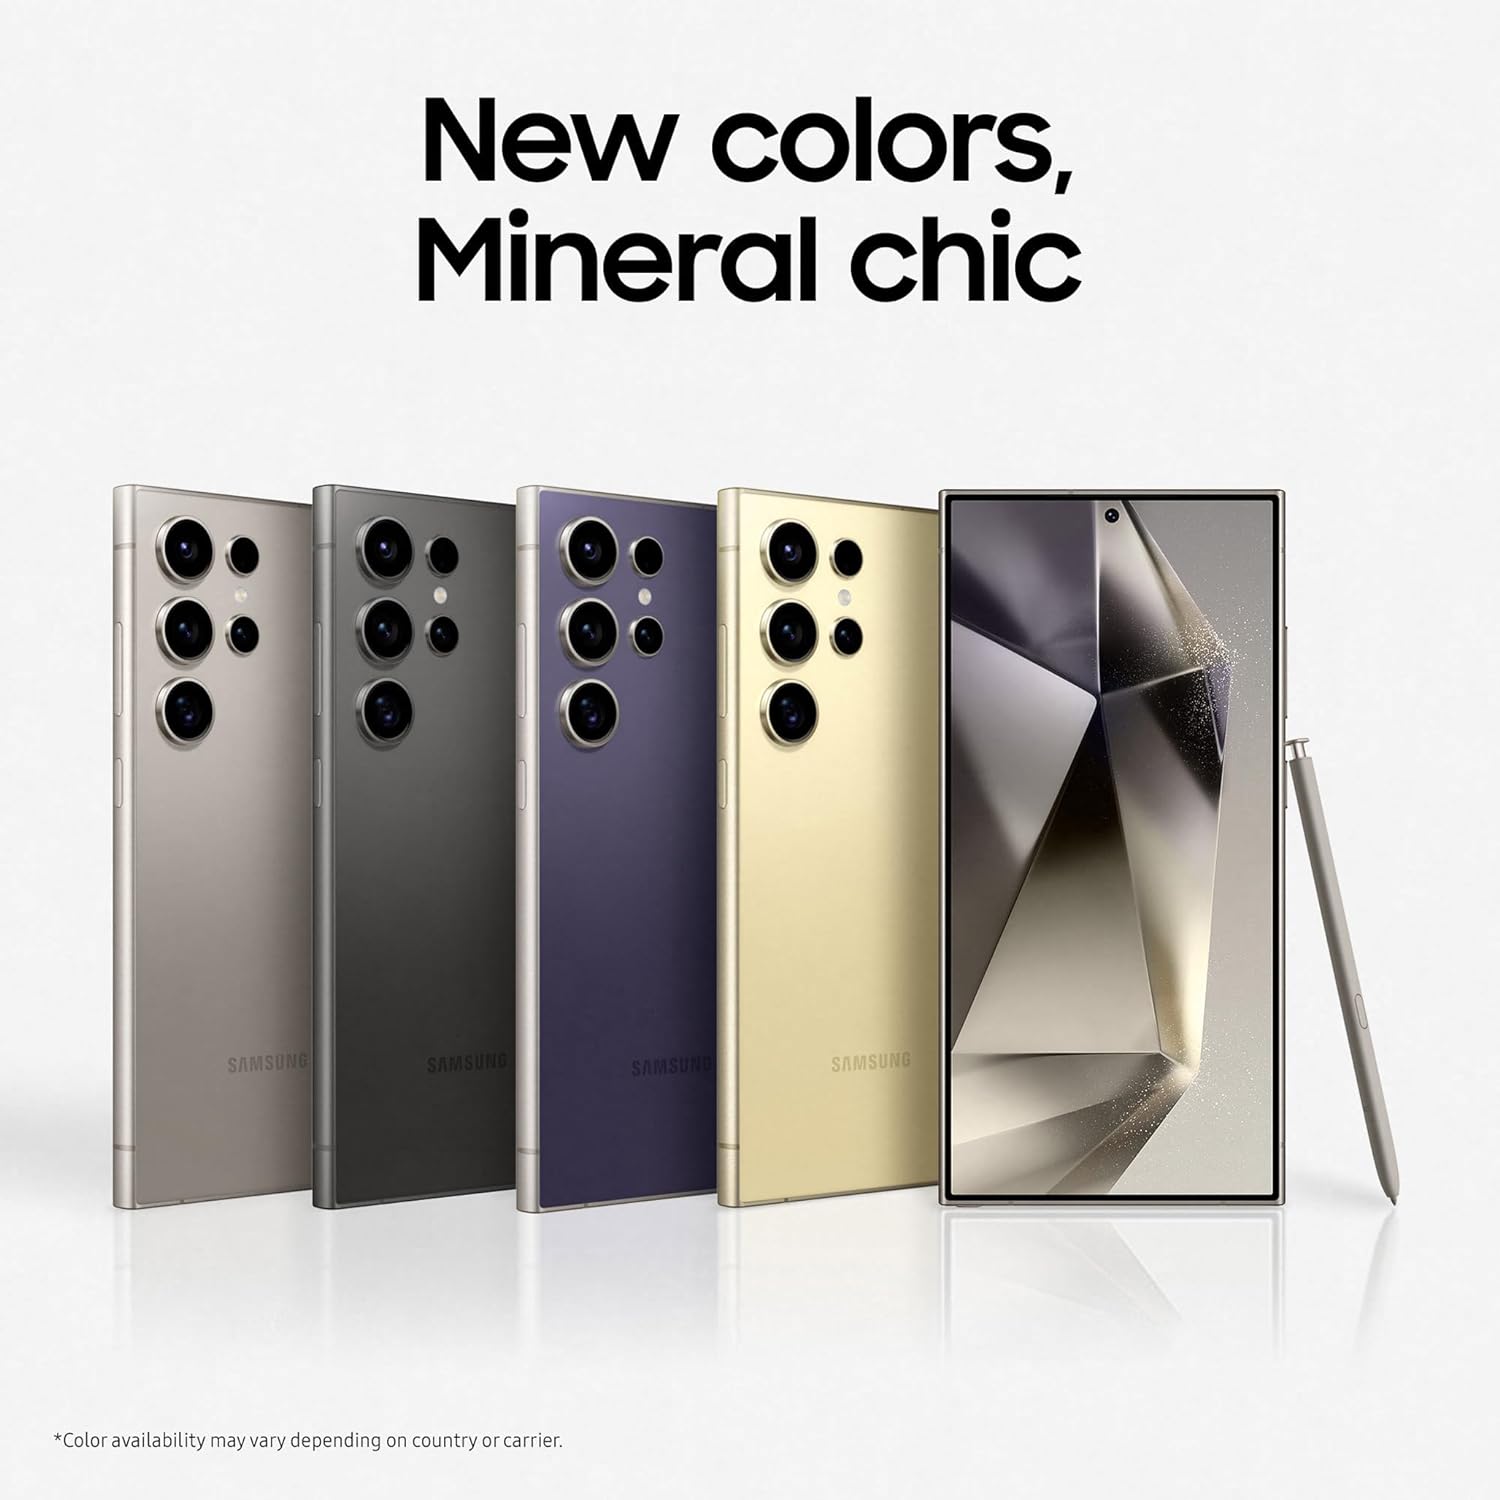 This image features an advertisement for Samsung mobile devices, showcasing new colors for a smartphone model. There are several phones displayed side by side in an array of colors such as gold, black, purple, and silver/gray. The phones have multiple camera lenses on the back, indicating high-end models with advanced photography capabilities. The last phone on the right is shown unfolded, which suggests that this is a foldable smartphone. There is also text which says 